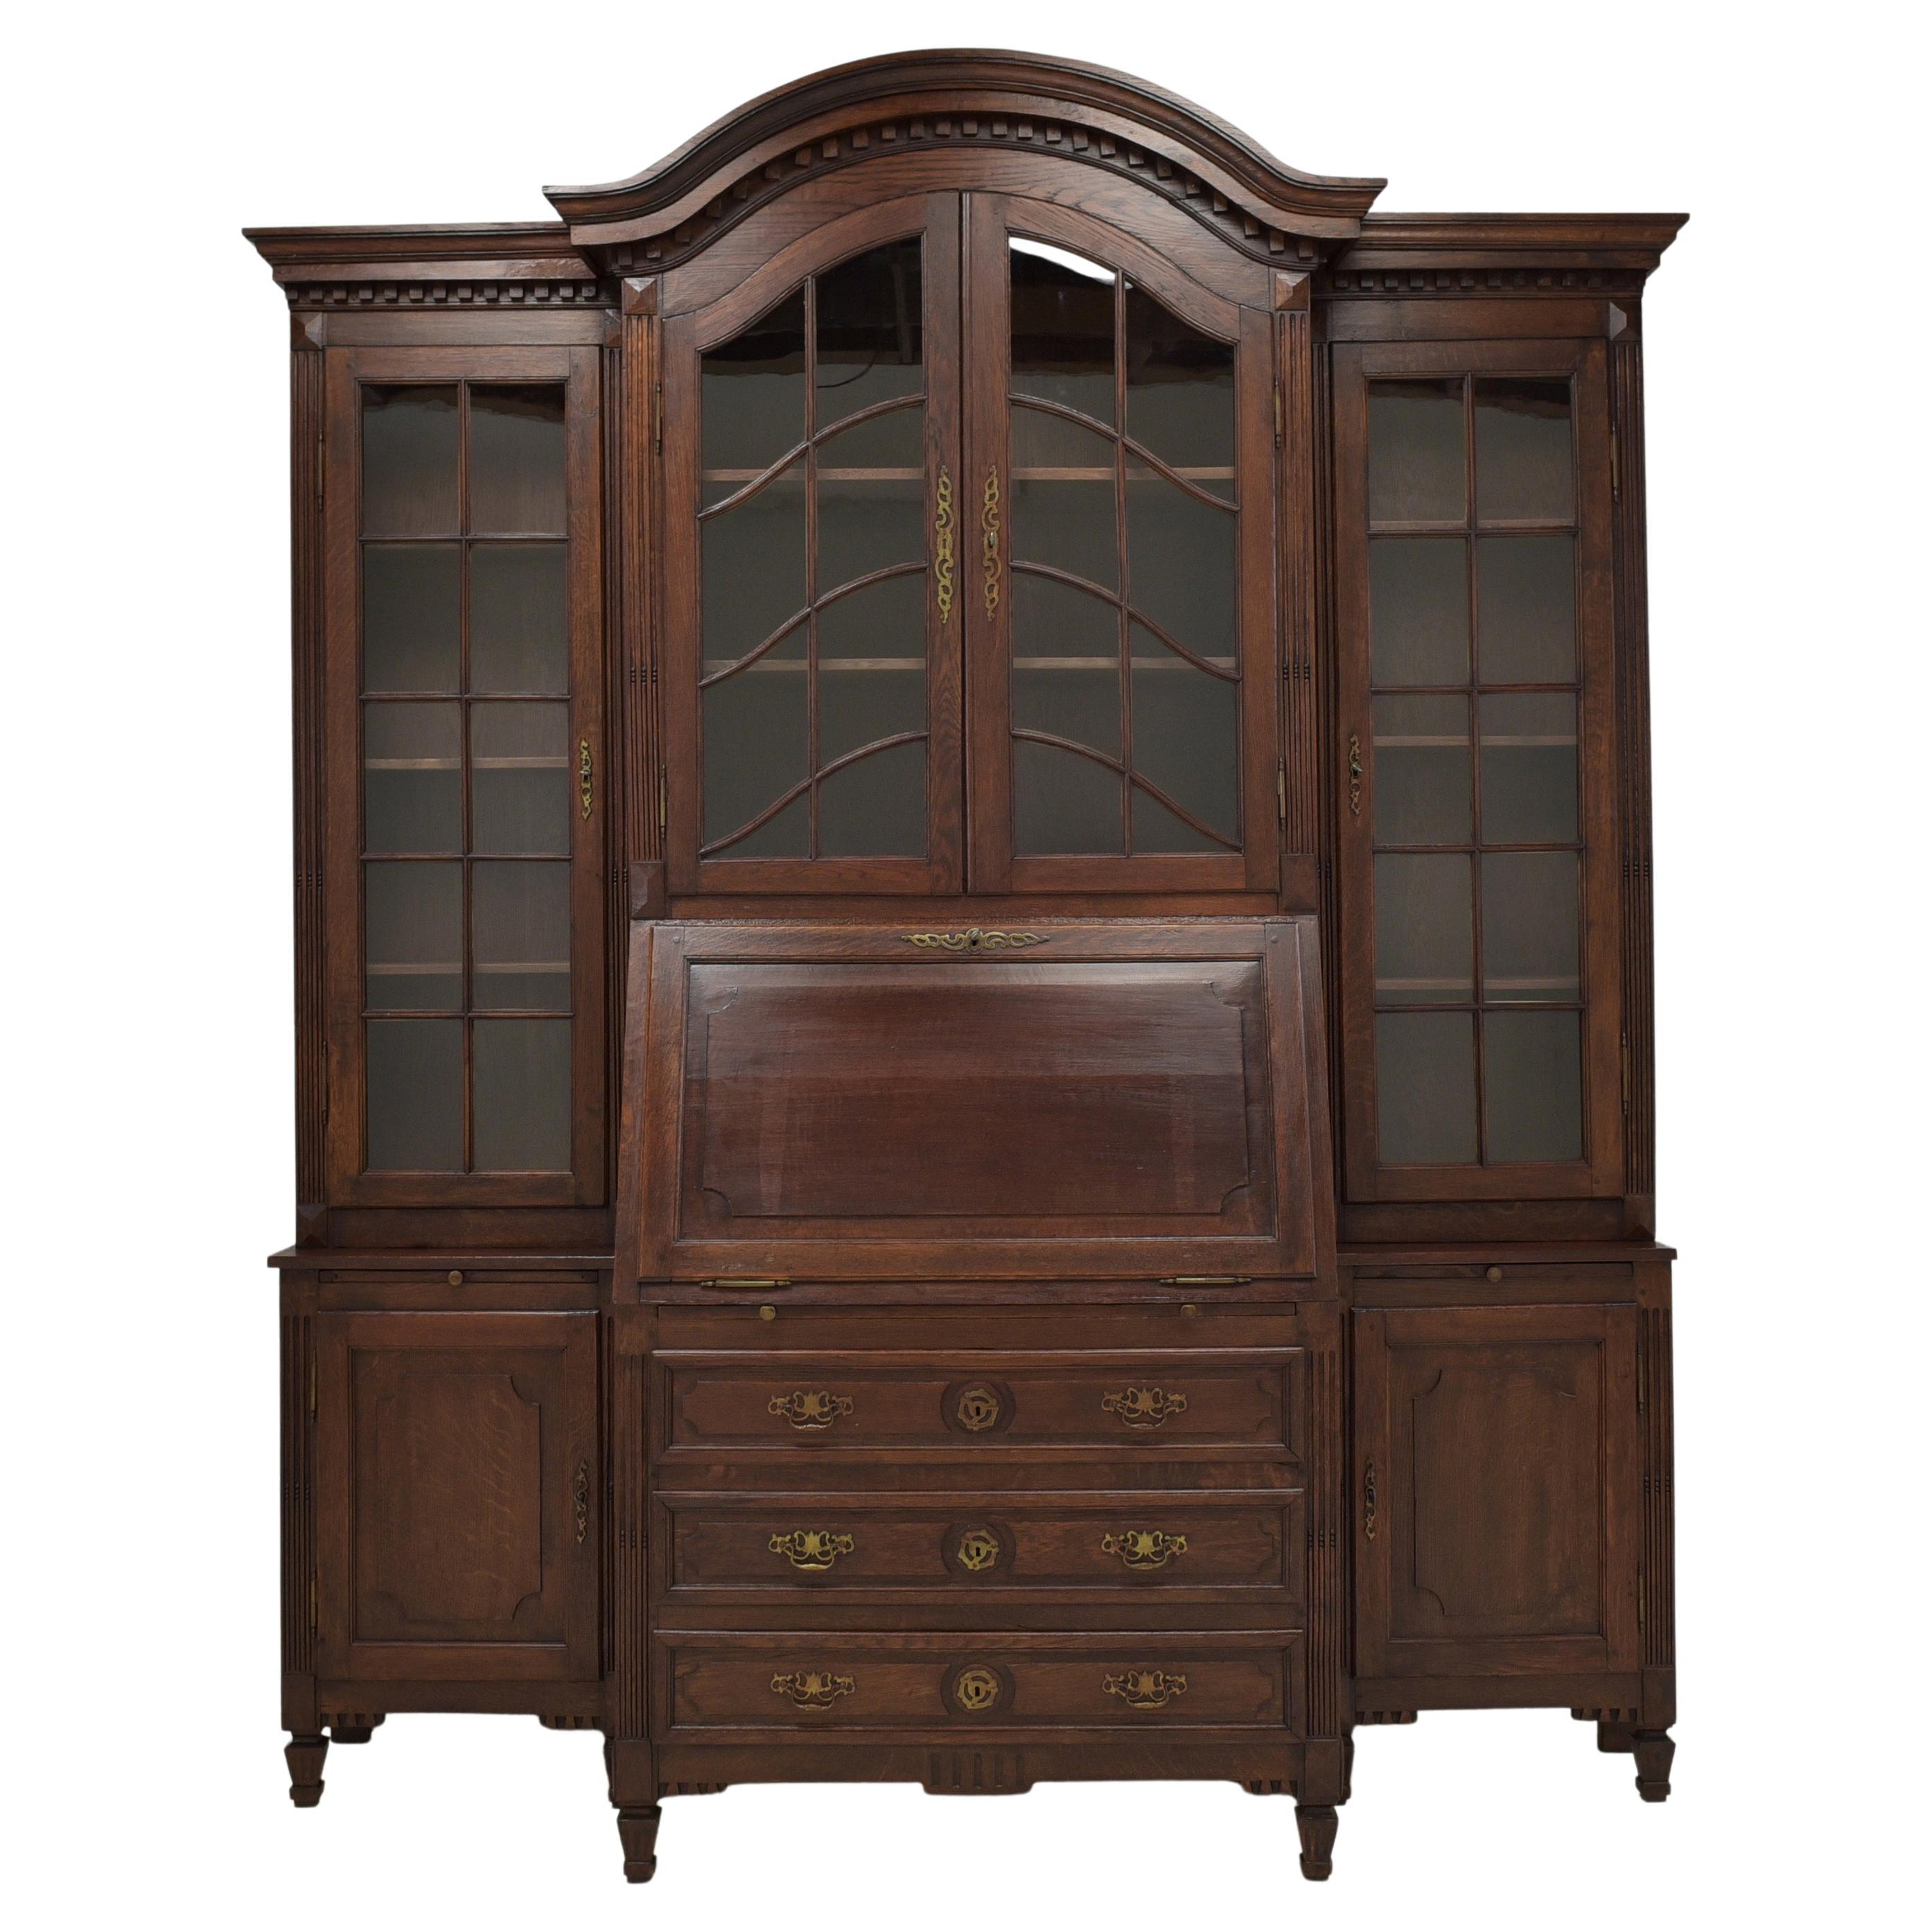 Large Display Cabinet / Bookcase with Secretary in Oak, 1900